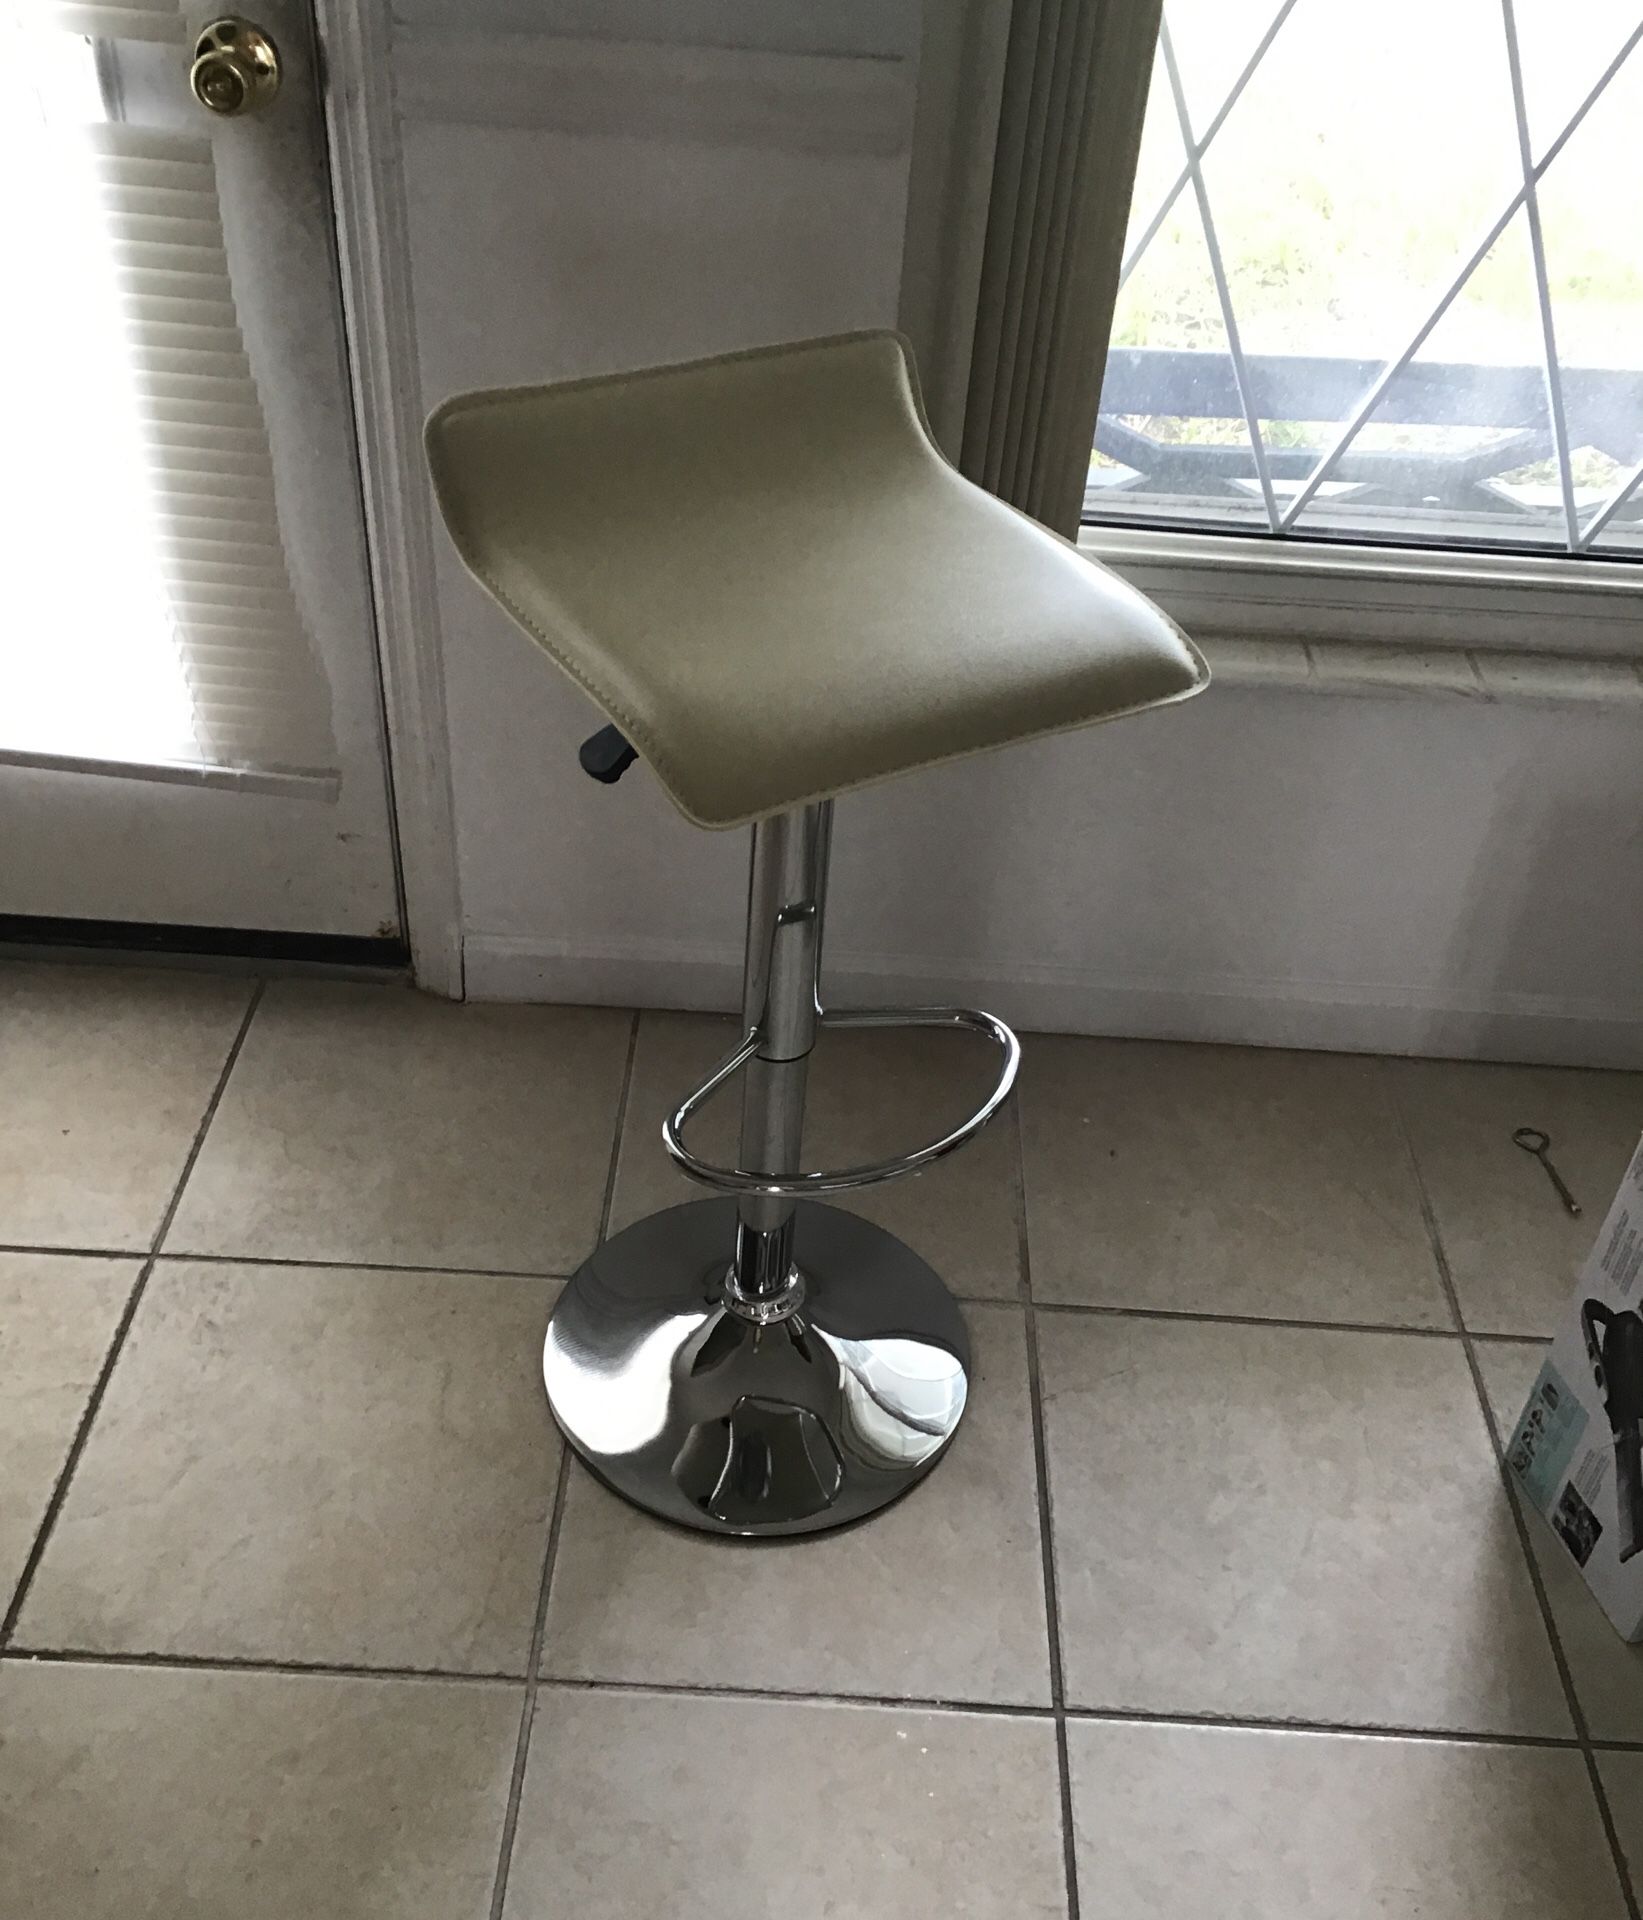 4 adjustable height bar stools. 1 shown put together,3 still in boxes. New never used. Remodeled kitchen,went in a different direction. Couldn’t retu